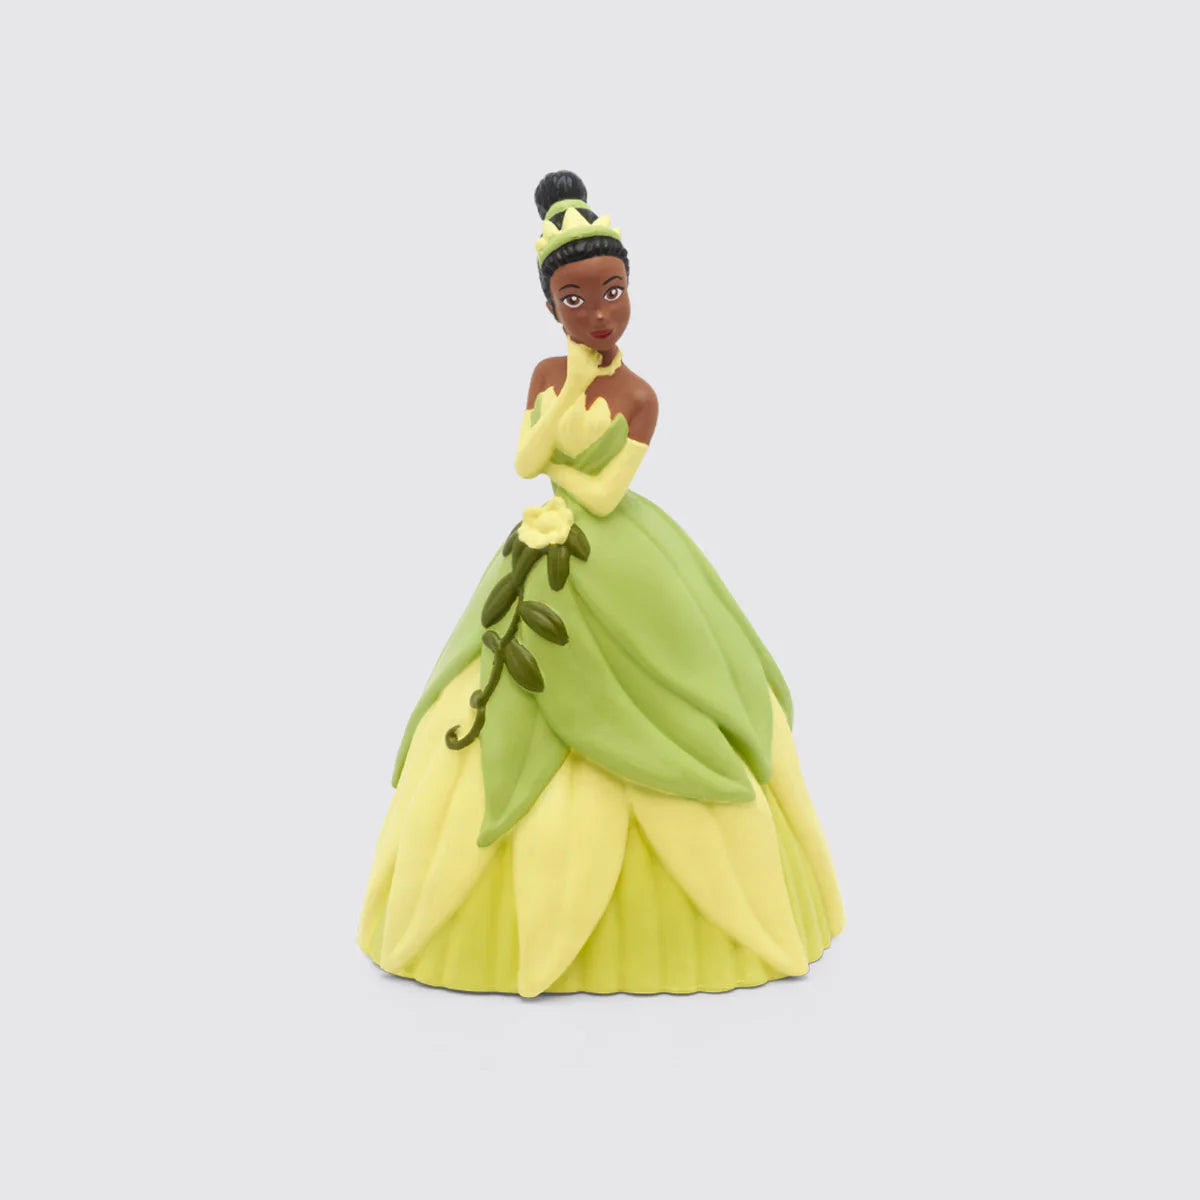 Tonies-Tonies Characters - Disney The Princess & The Frog-10000689-Legacy Toys